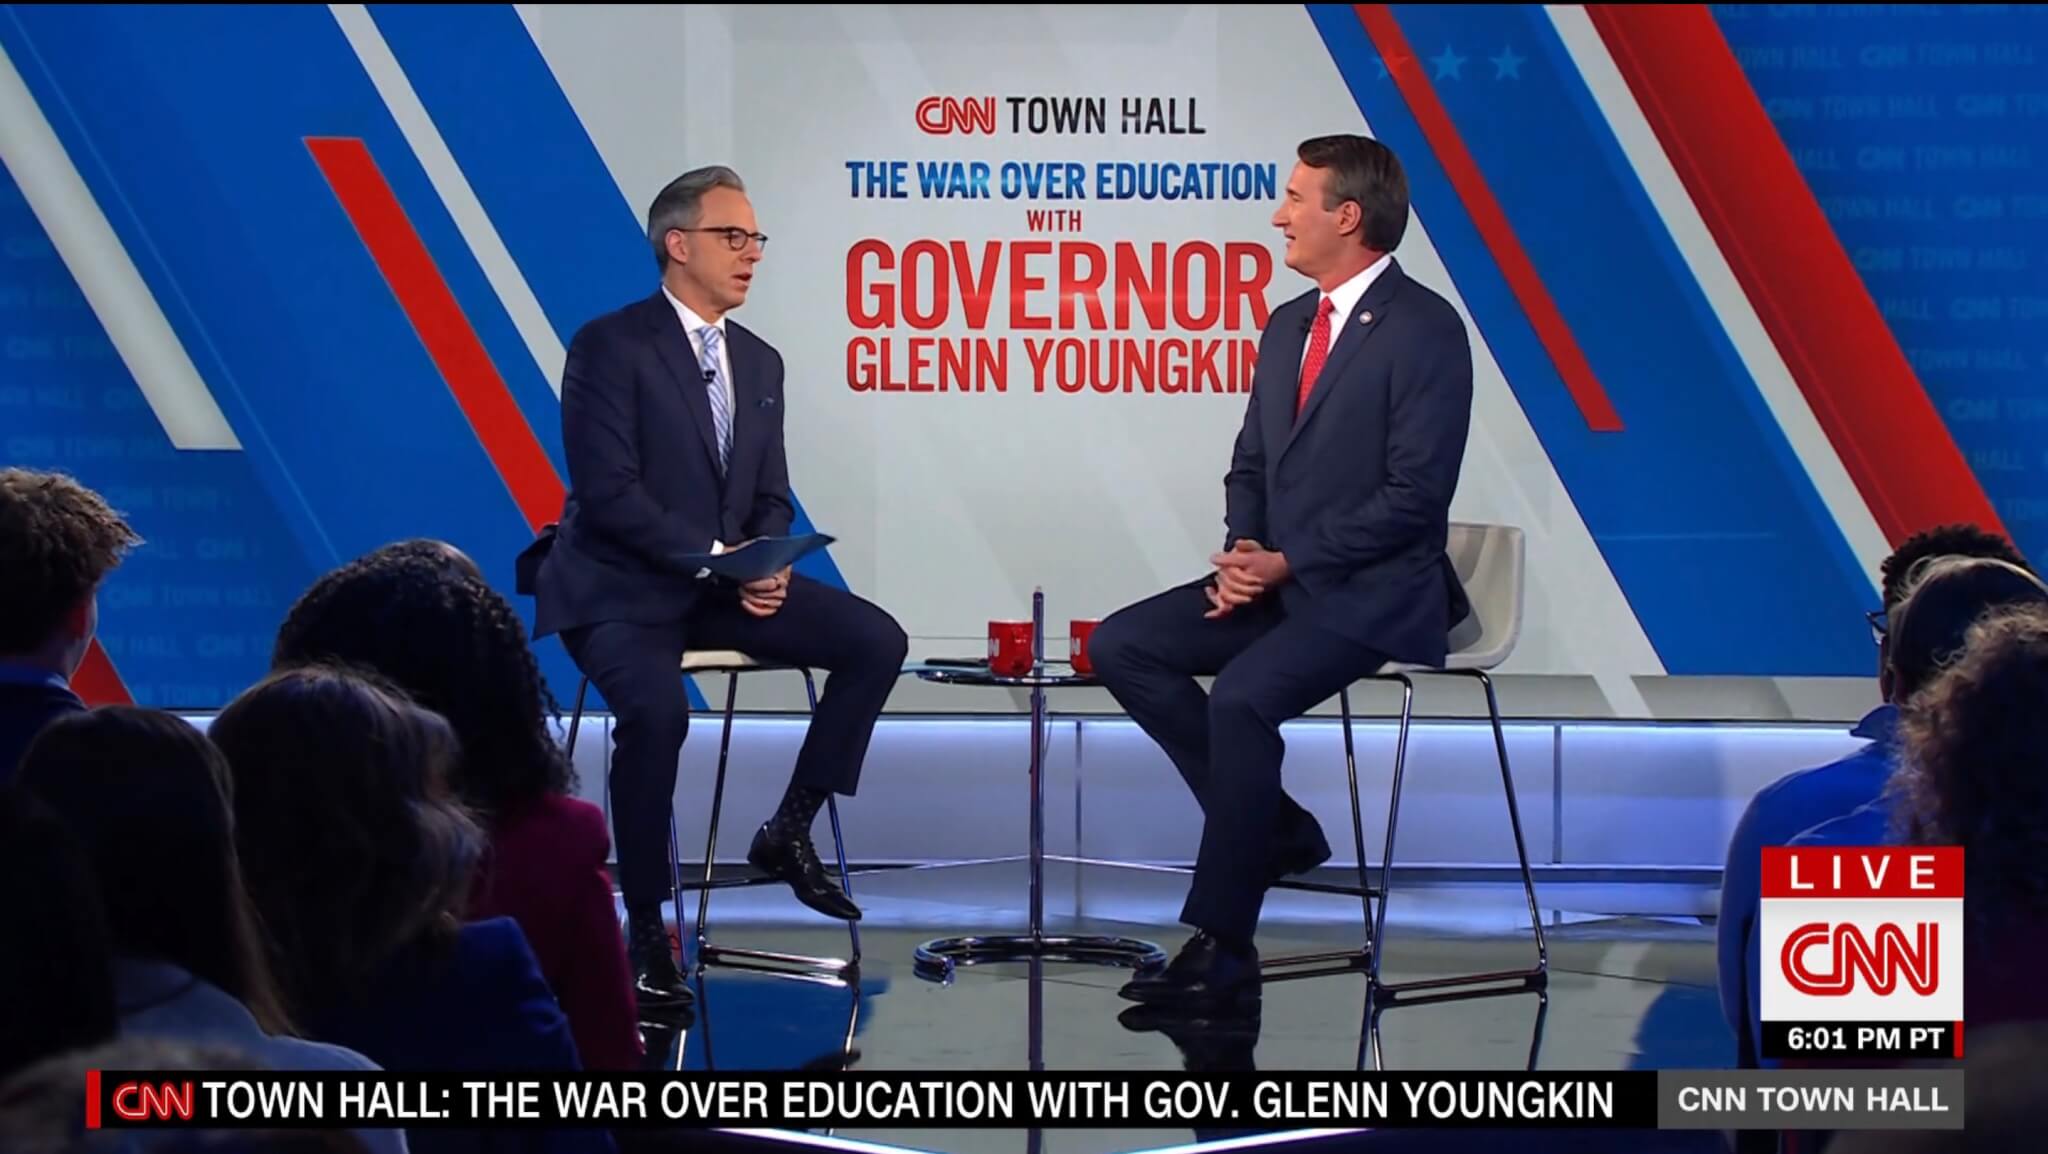 Virginians Respond to Youngkin’s CNN Education Town Hall With Fact-Checking, Skepticism